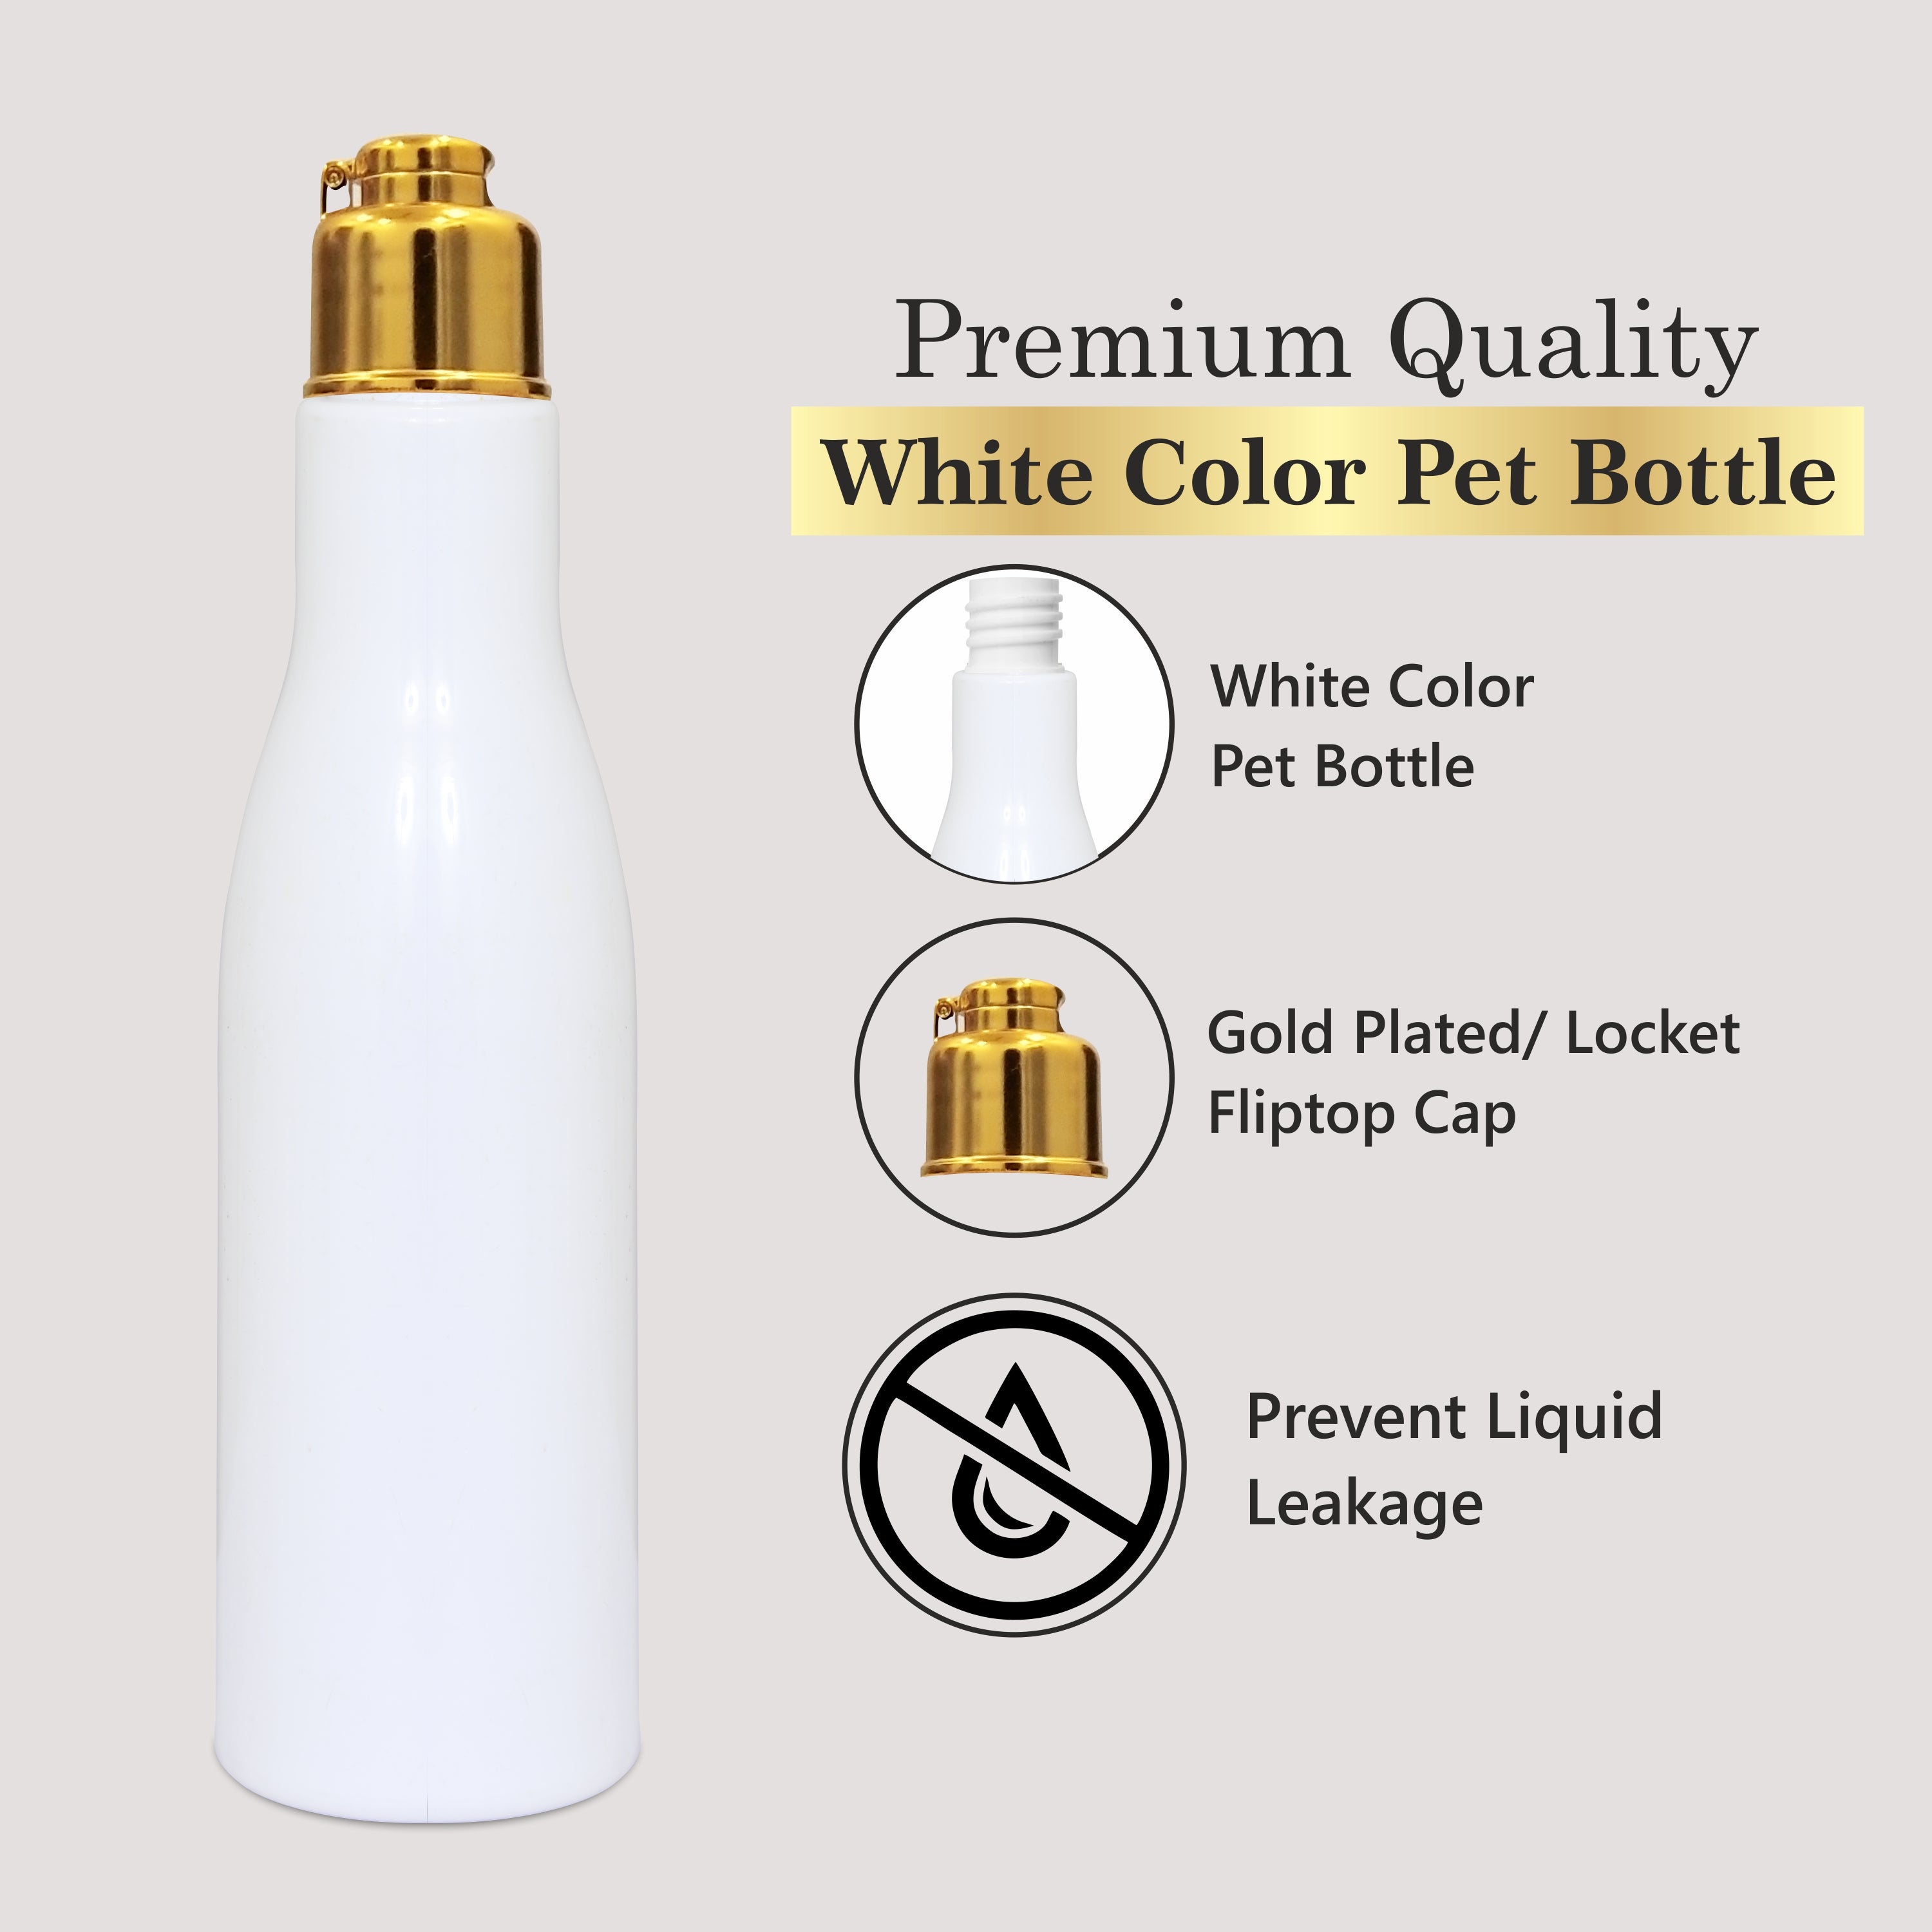 |ZMW45| MILKY WHITE ASTA BOTTLE WITH GOLD PLATED LOCKET FLIPTOP CAP ZMW44 Available Size: 100ml, 200ml